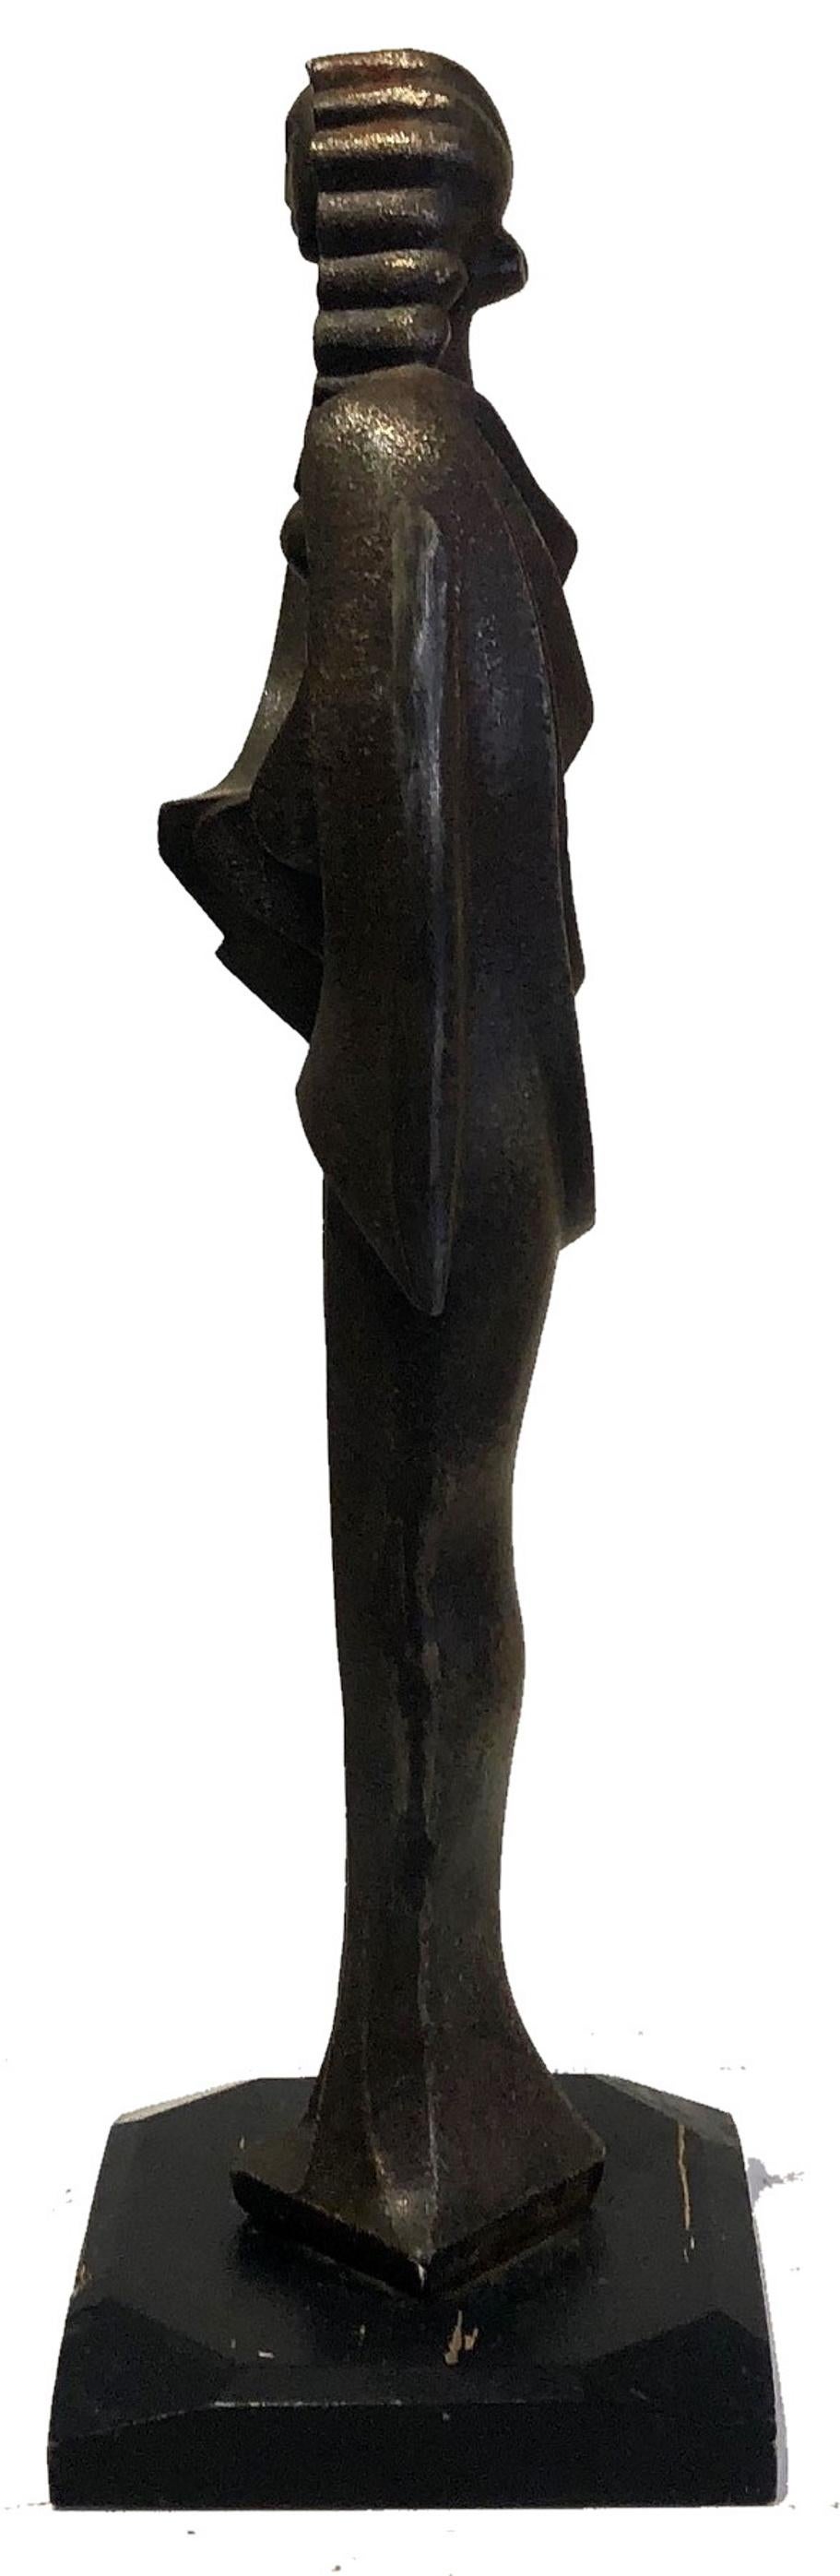 American Art Deco Wrought Iron Sculpture of Nude Female, ca. 1920’s  For Sale 1